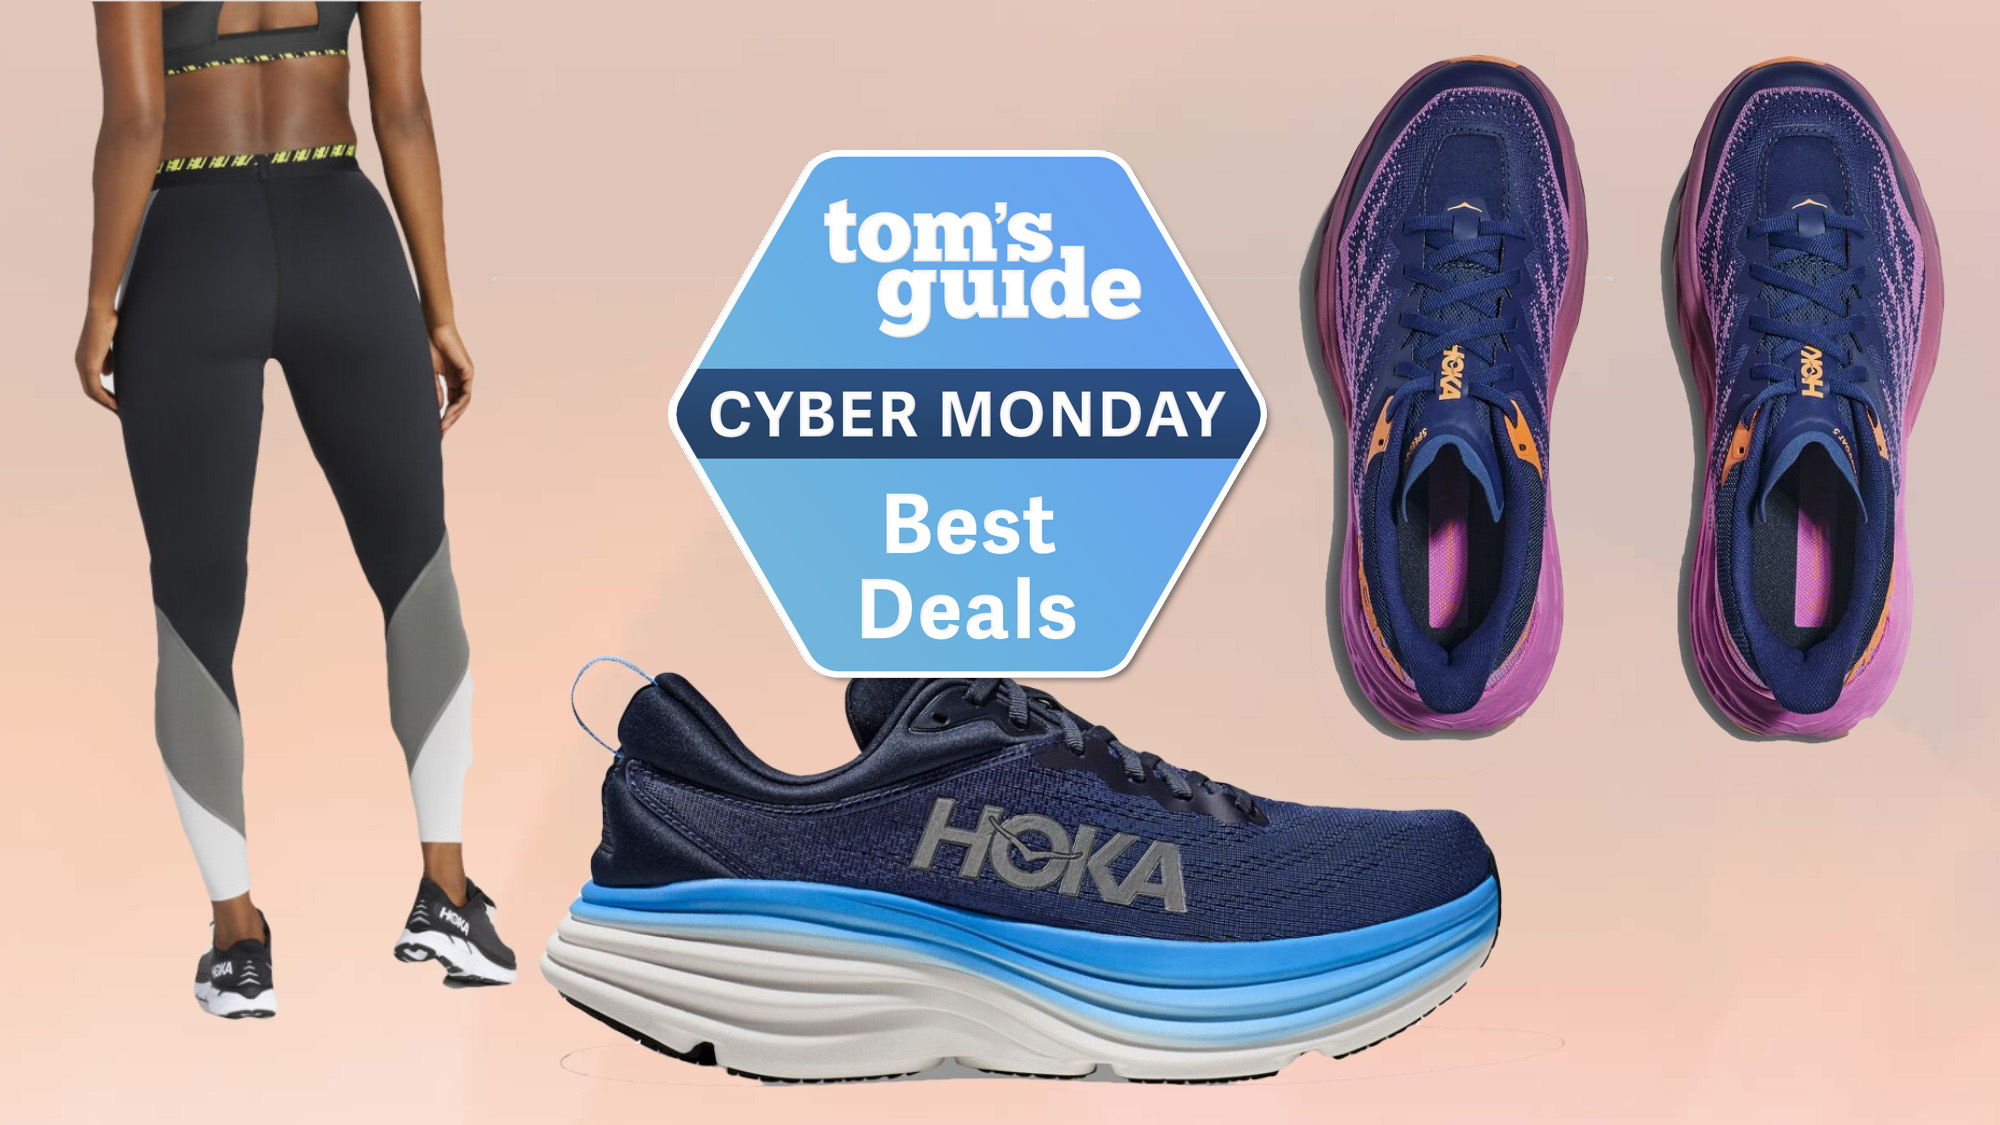 23 things you can still buy in the Hoka Cyber Monday sale starting at